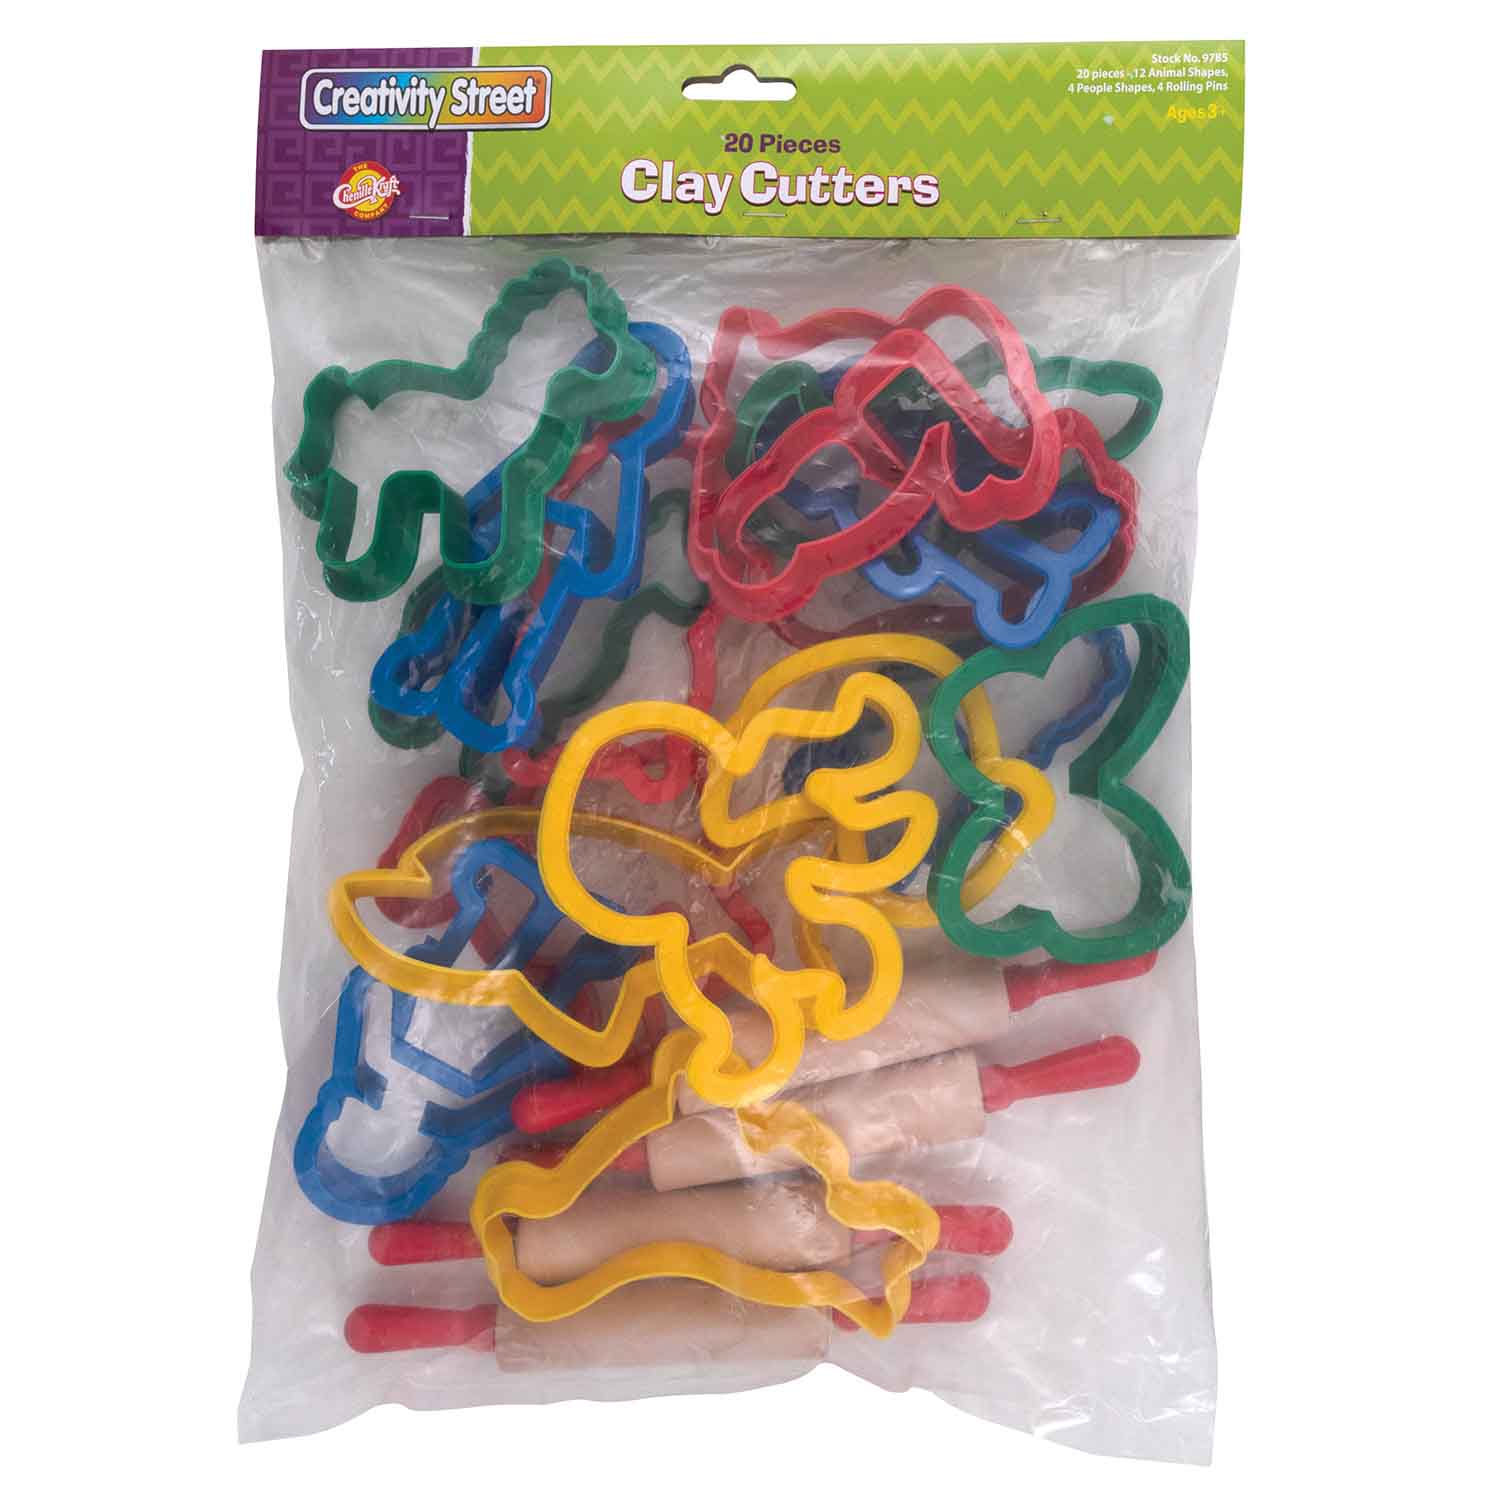 Clay Cutters, 20 Piece Set